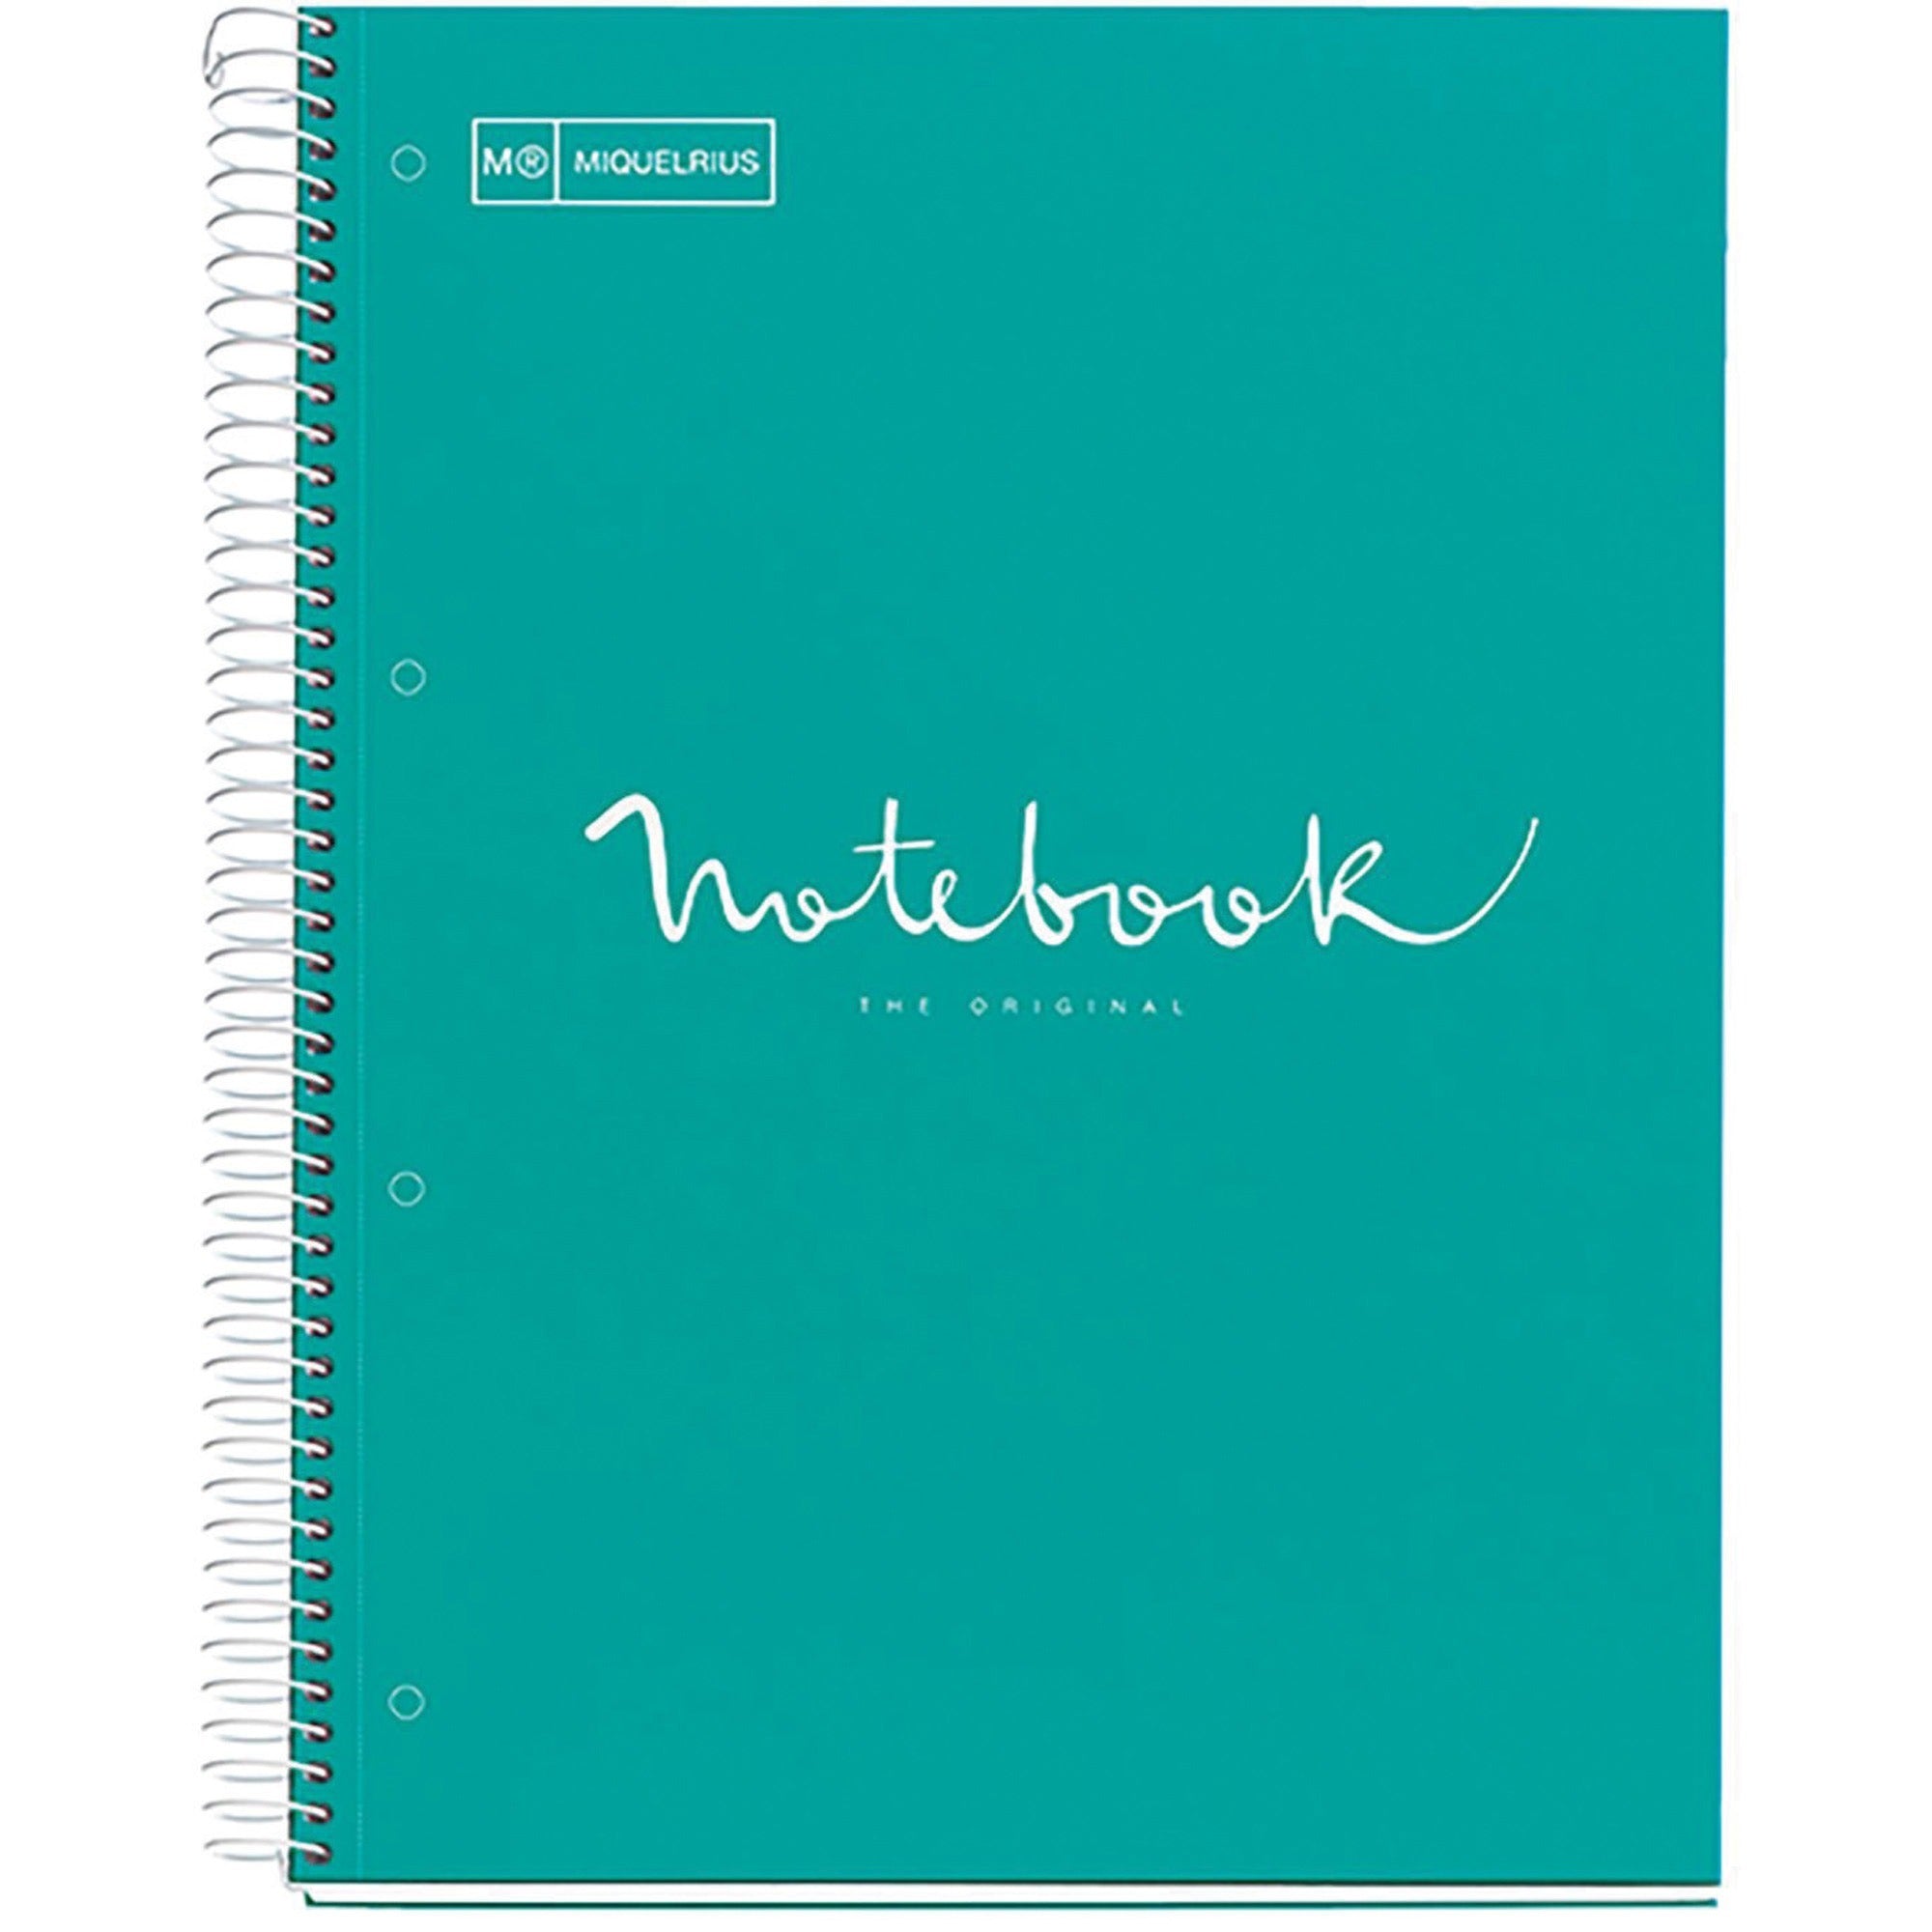 roaring-spring-fashion-tint-1-subject-notebook-1-subjects-wire-bound-3-holes-24-lb-basis-weight-030-x-85-x-11-cardboard-plastic-cover-perforated-hole-punched-sturdy-bleed-free-printed-durable-smooth-1-each_roa49274 - 1